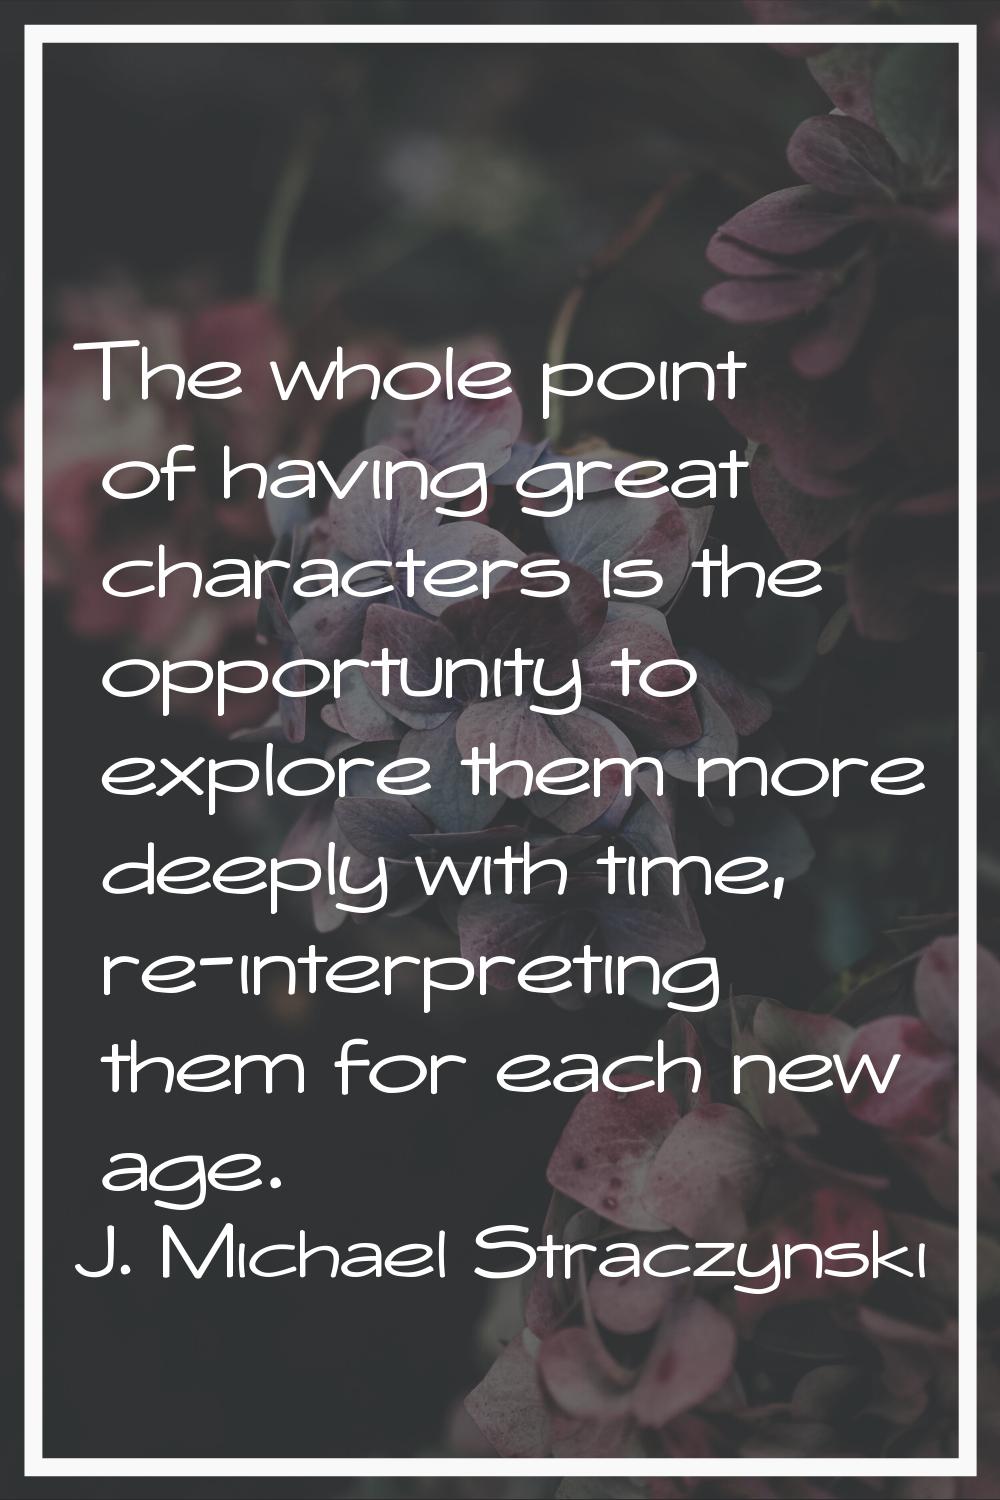 The whole point of having great characters is the opportunity to explore them more deeply with time